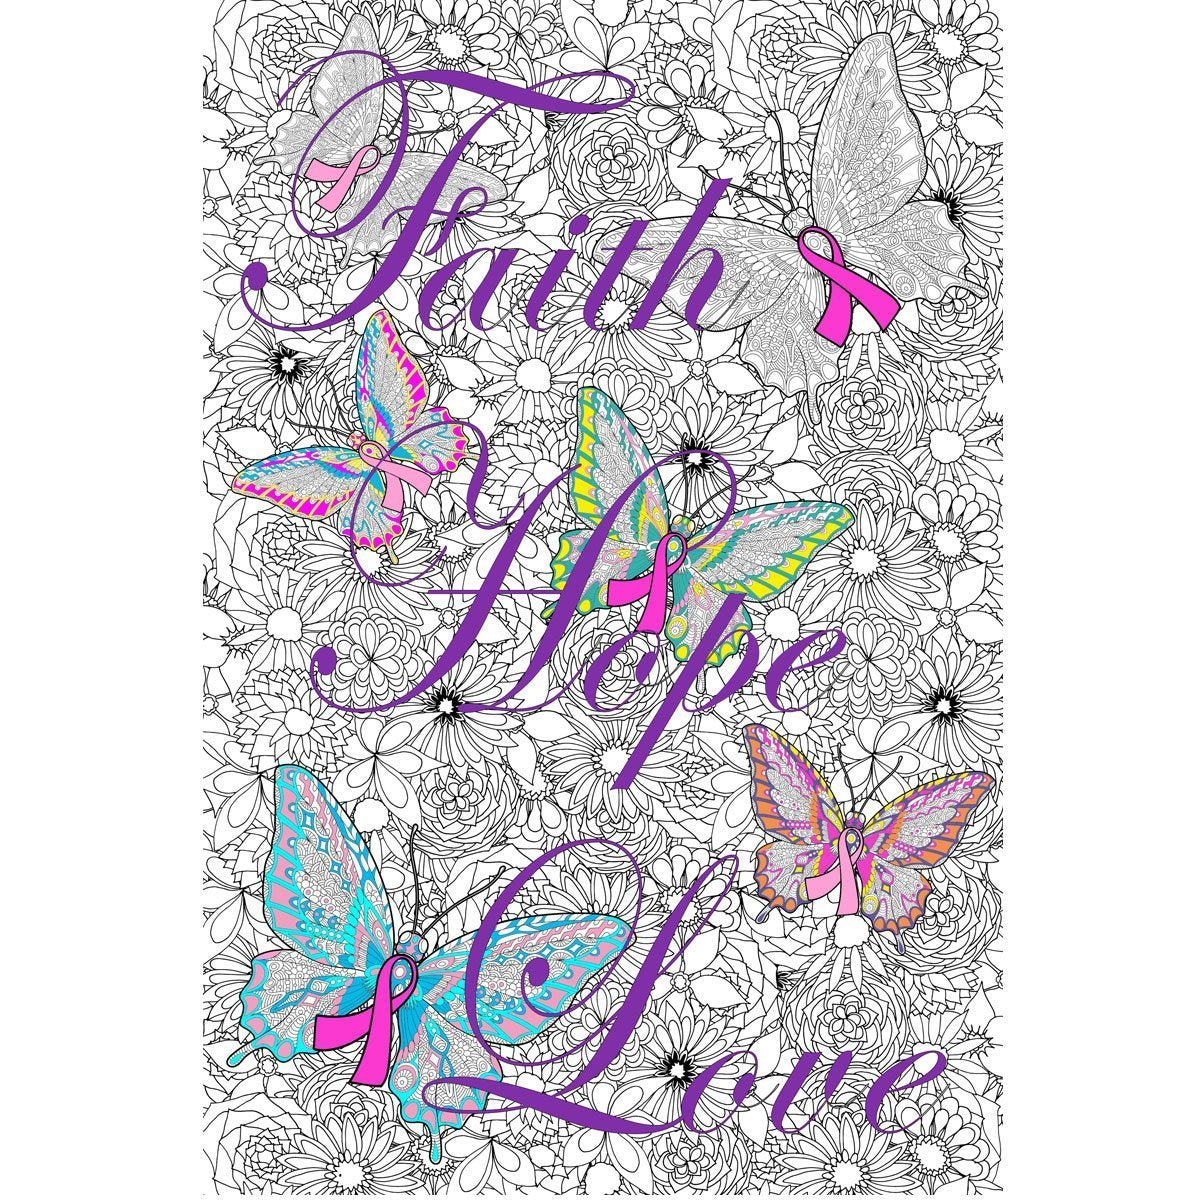 Great2bColorful  - Ribbons of Hope Coloring Poster